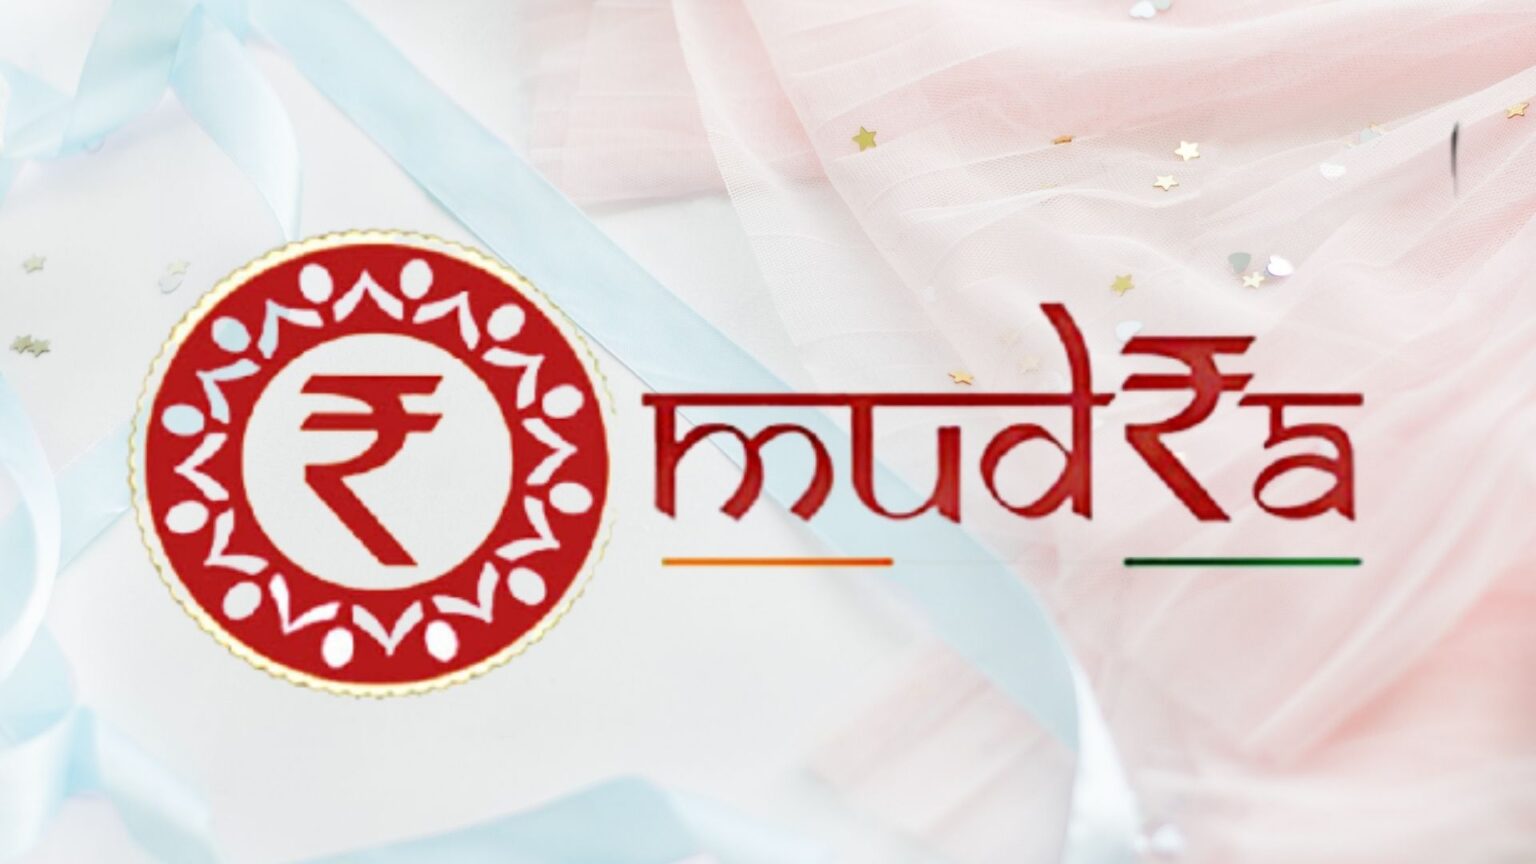 How to Get a Mudra Loan for a Small Business in the Best Possible way